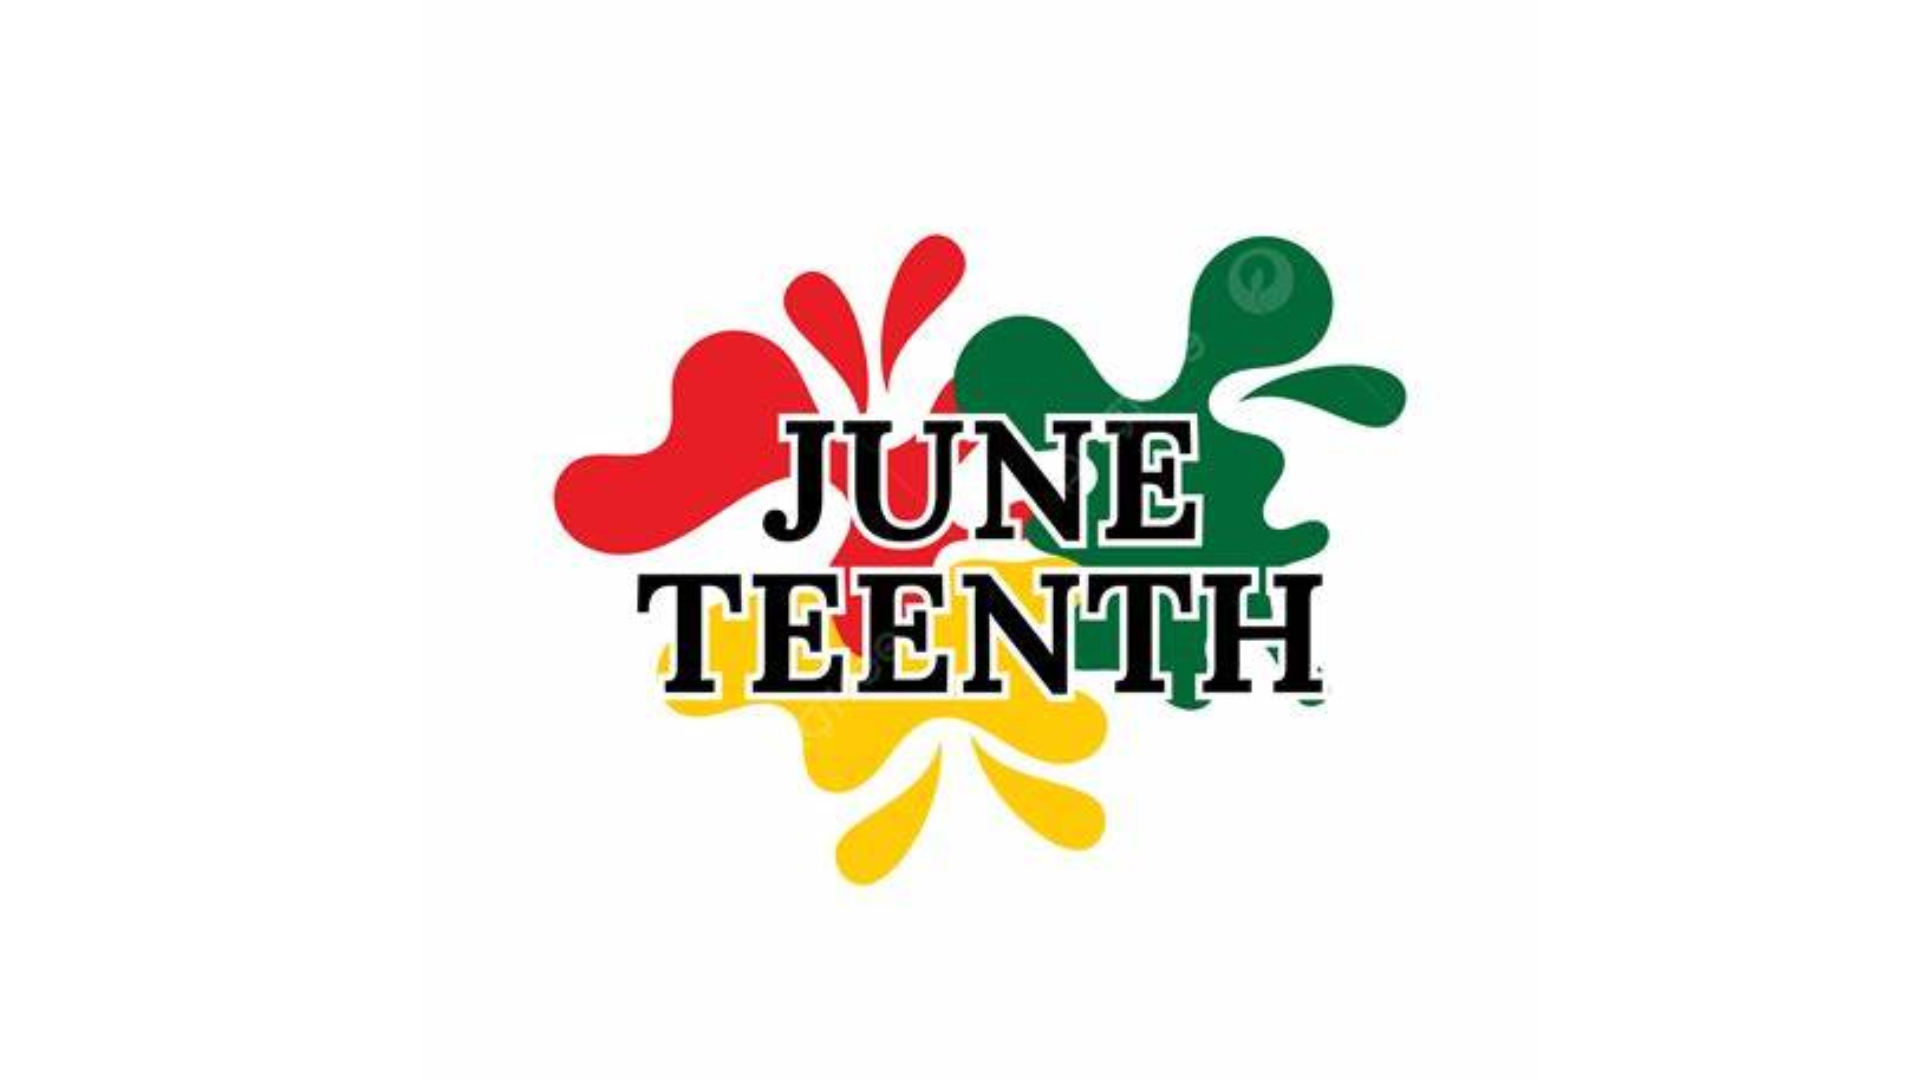 Juneteenth: Celebrating Freedom And Emancipation In The US